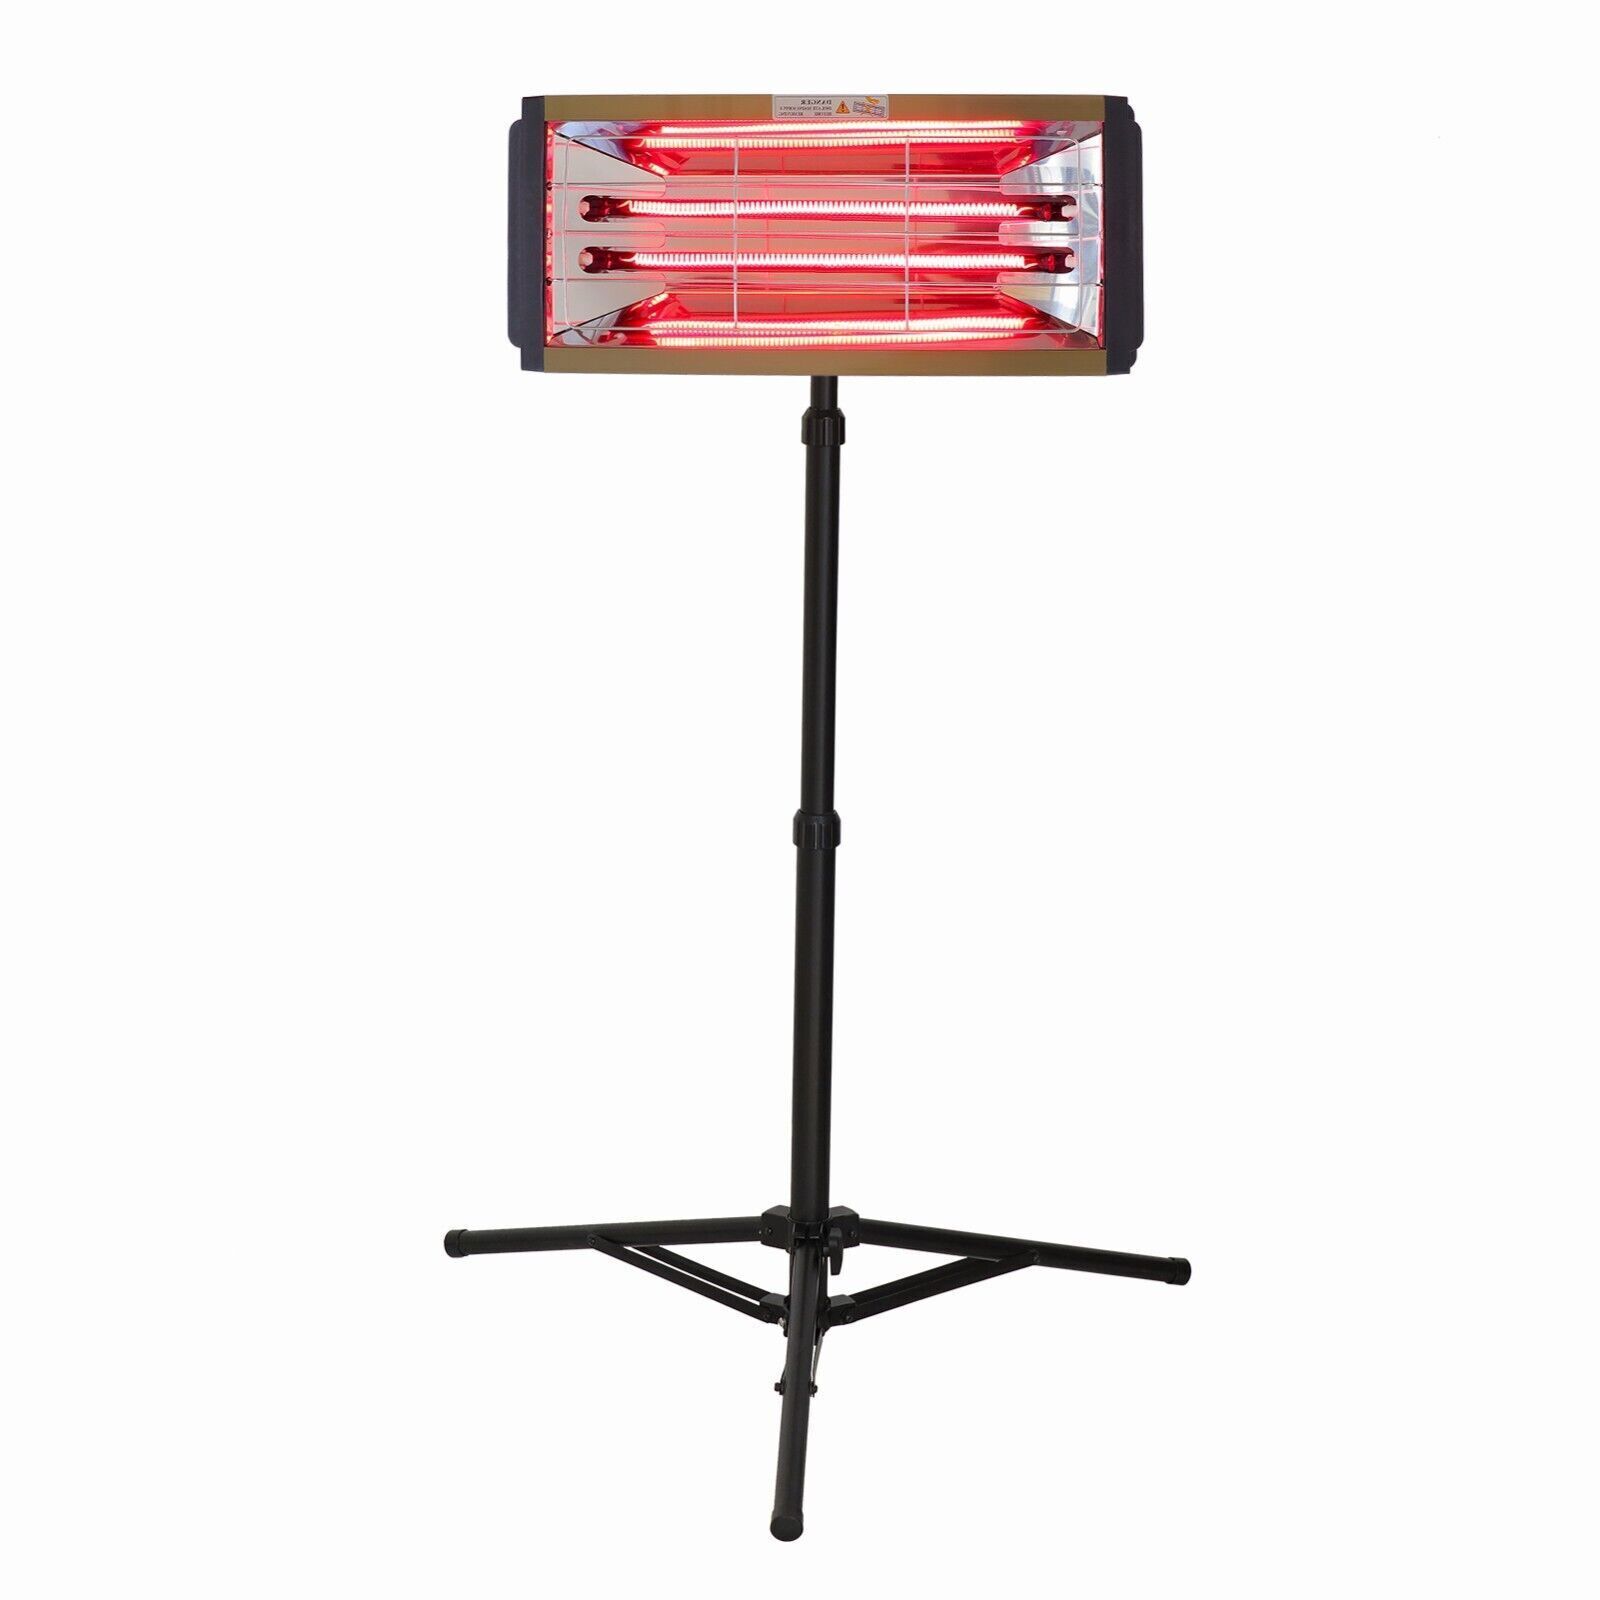 2000W Baking Infrared Paint Curing Lamp 110V Heater Heating Light Spray Booth 